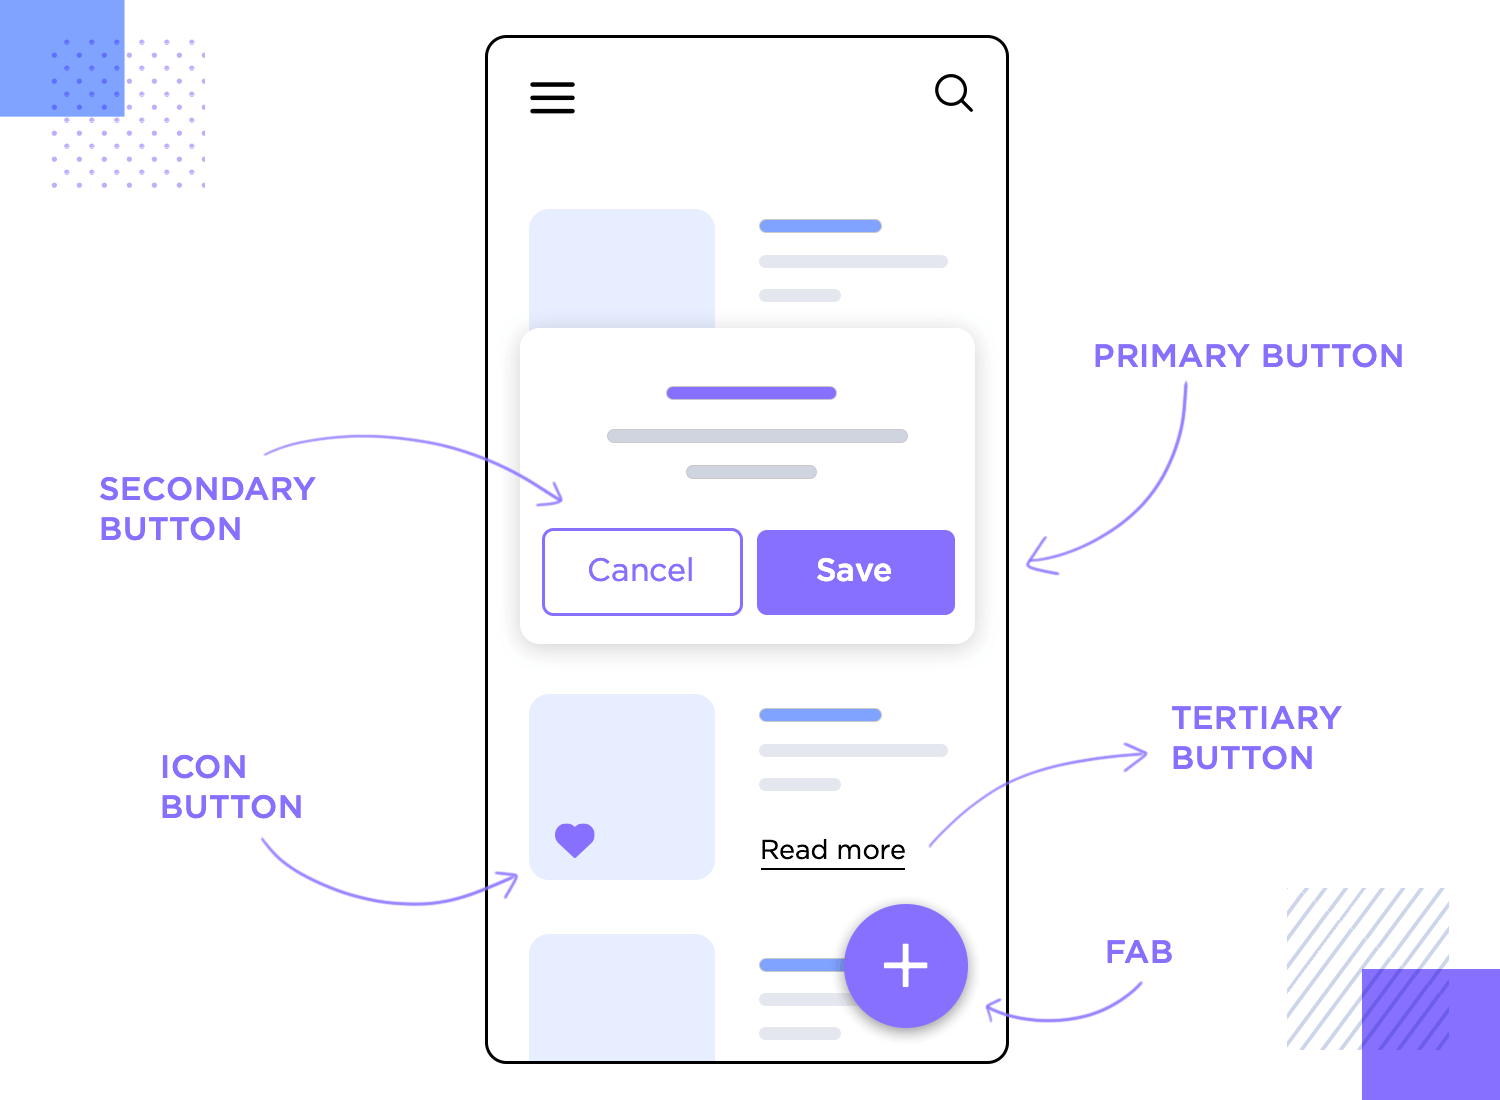 UI button design examples for mobile apps with primary, secondary, tertiary, icon, and FAB buttons